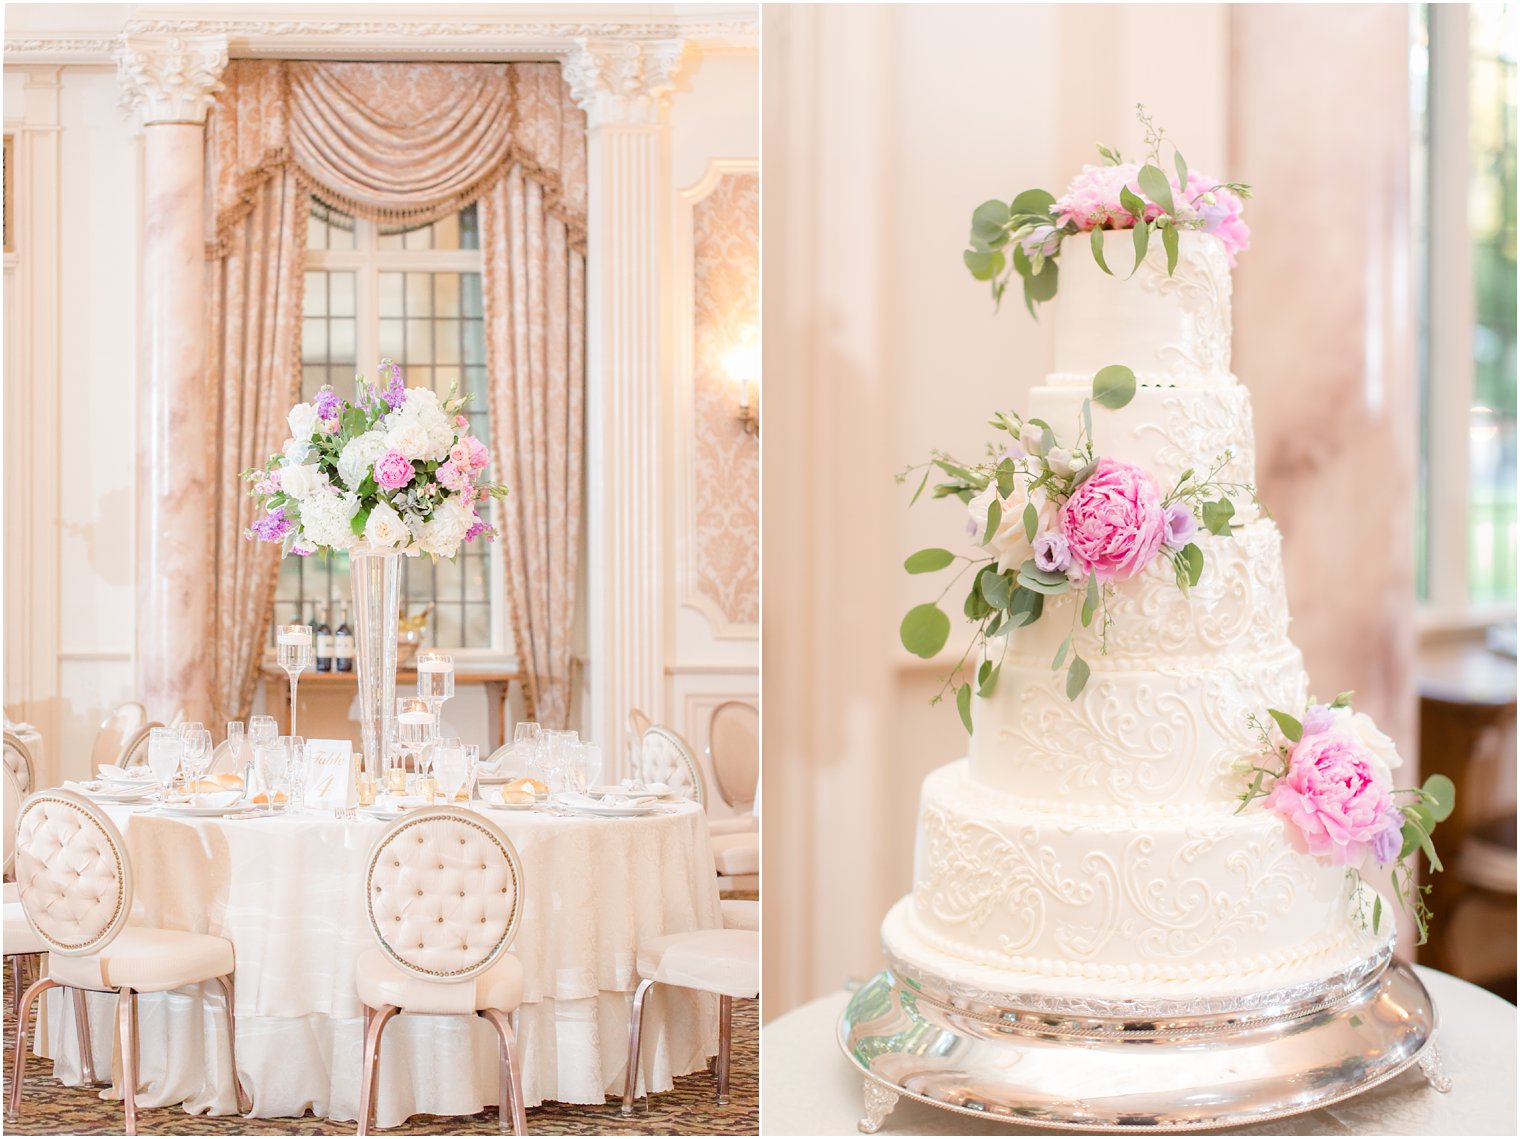 centerpieces and wedding cake at Pleasantdale Chateau